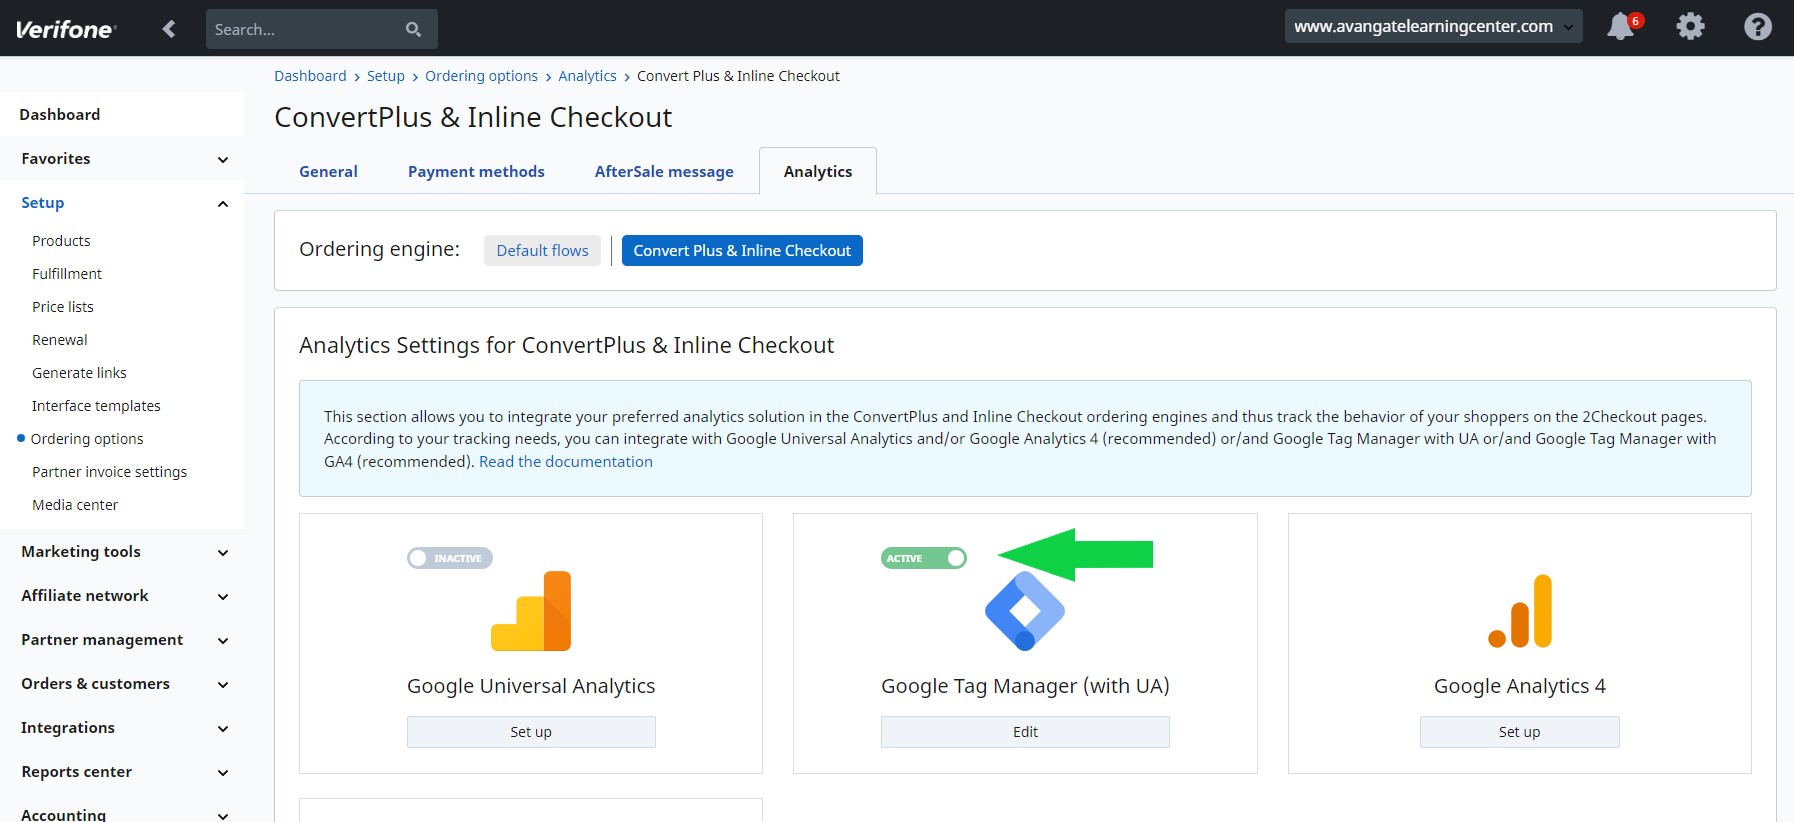 ConvertPlus & Inline Checkout - Activate Google Tag Manager with UA